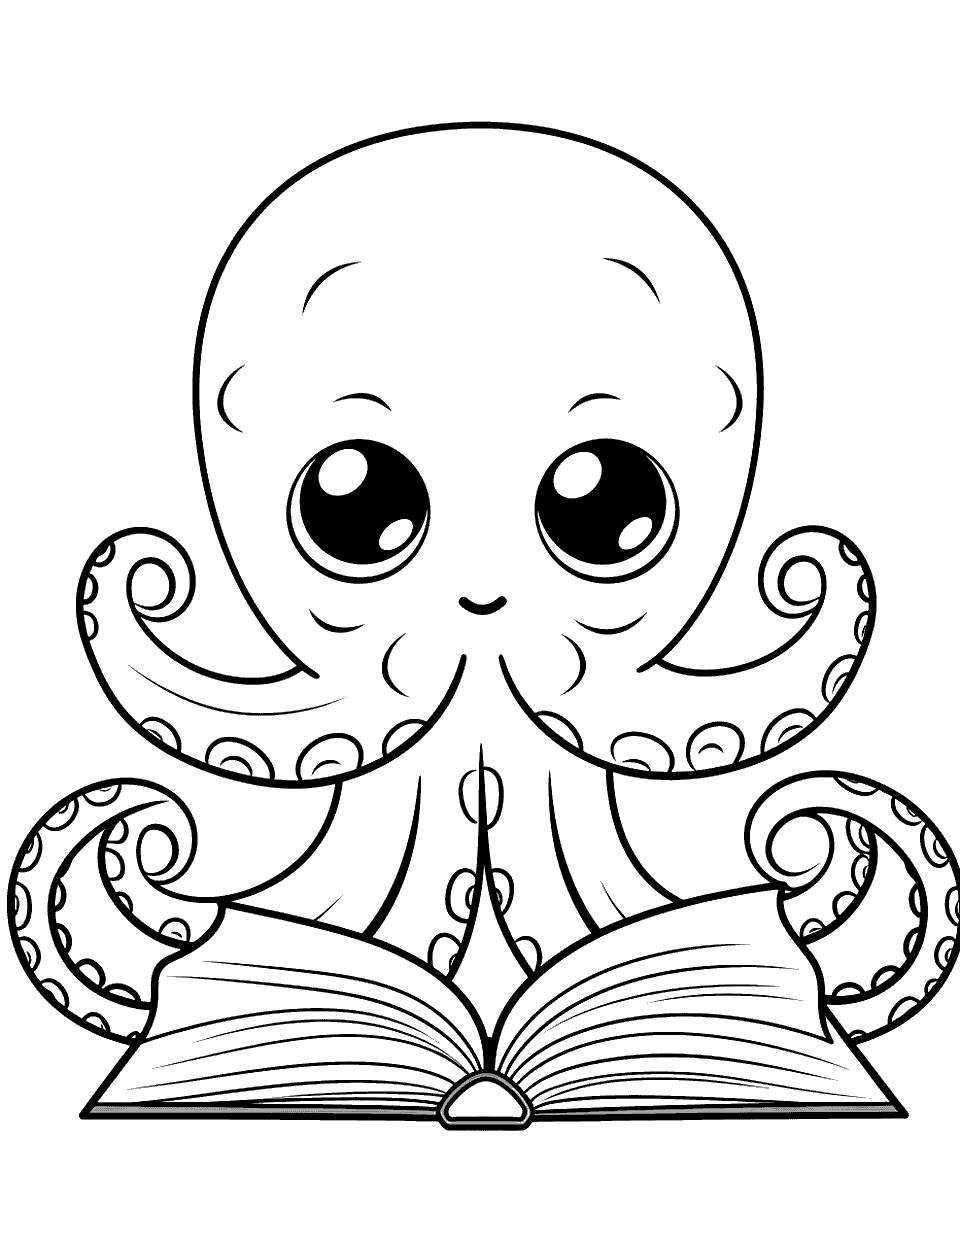 Octopus Reading a Book Coloring Page - An octopus engrossed in reading a large book.